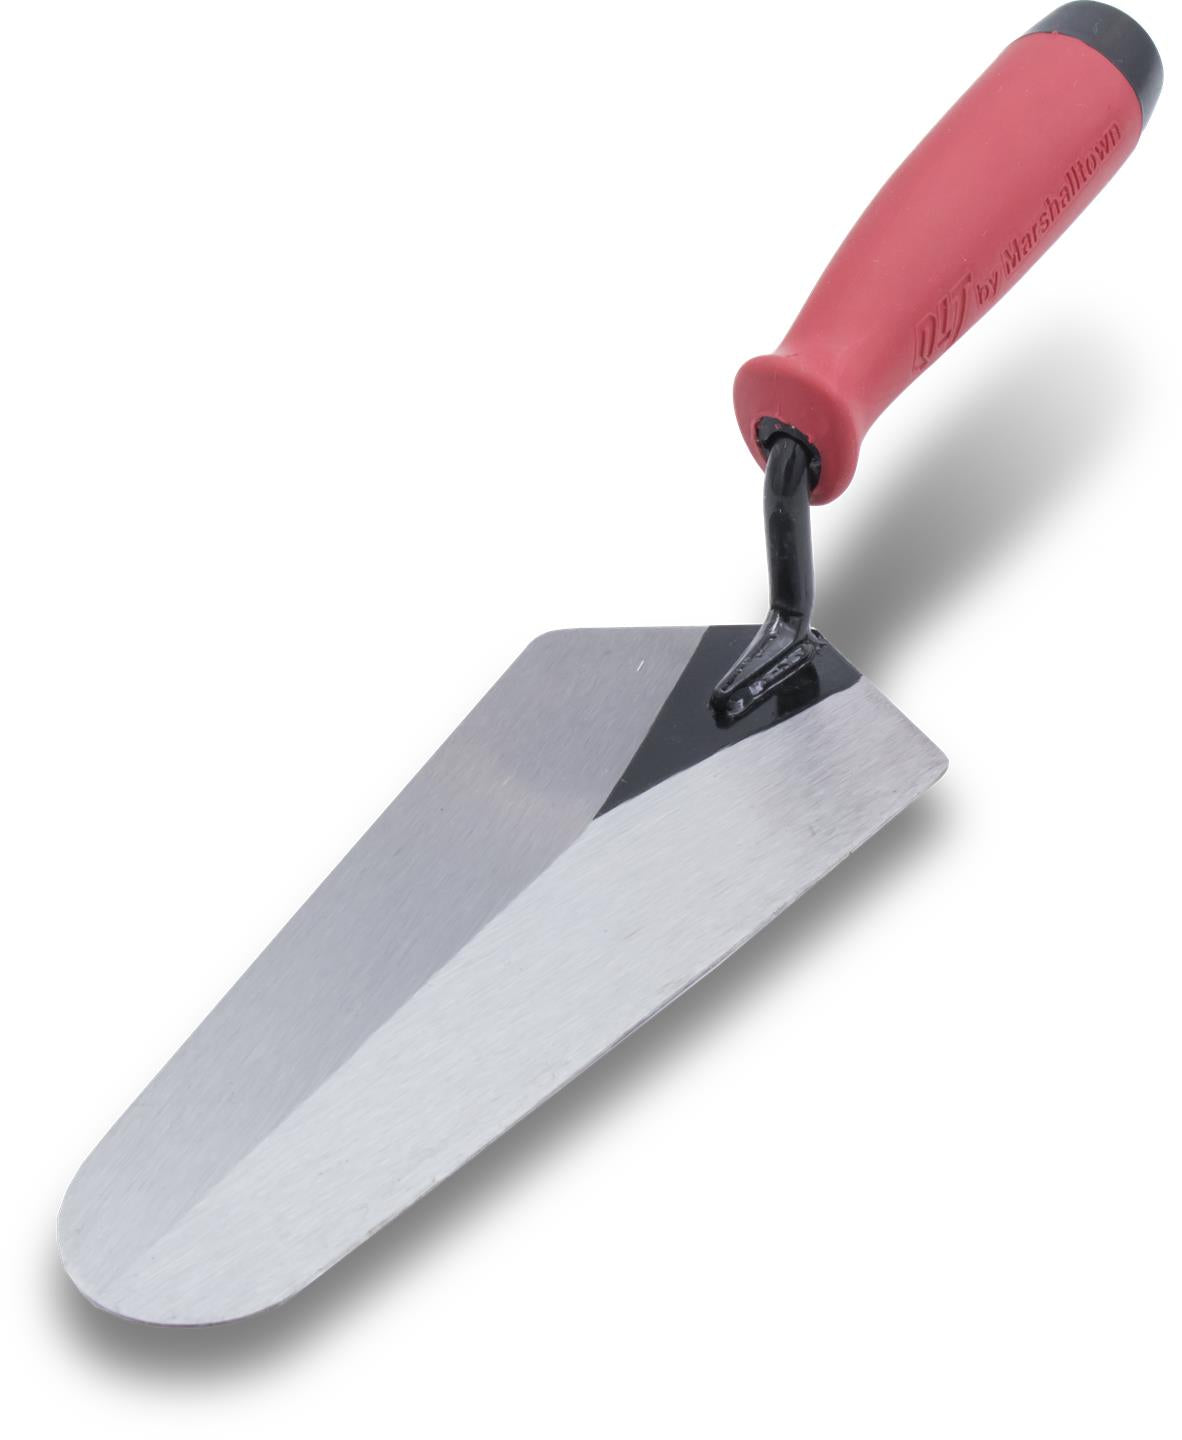 Marshalltown 18635 Gauging Trowel 7" x 3 3-8" with Red Soft Grip Handle